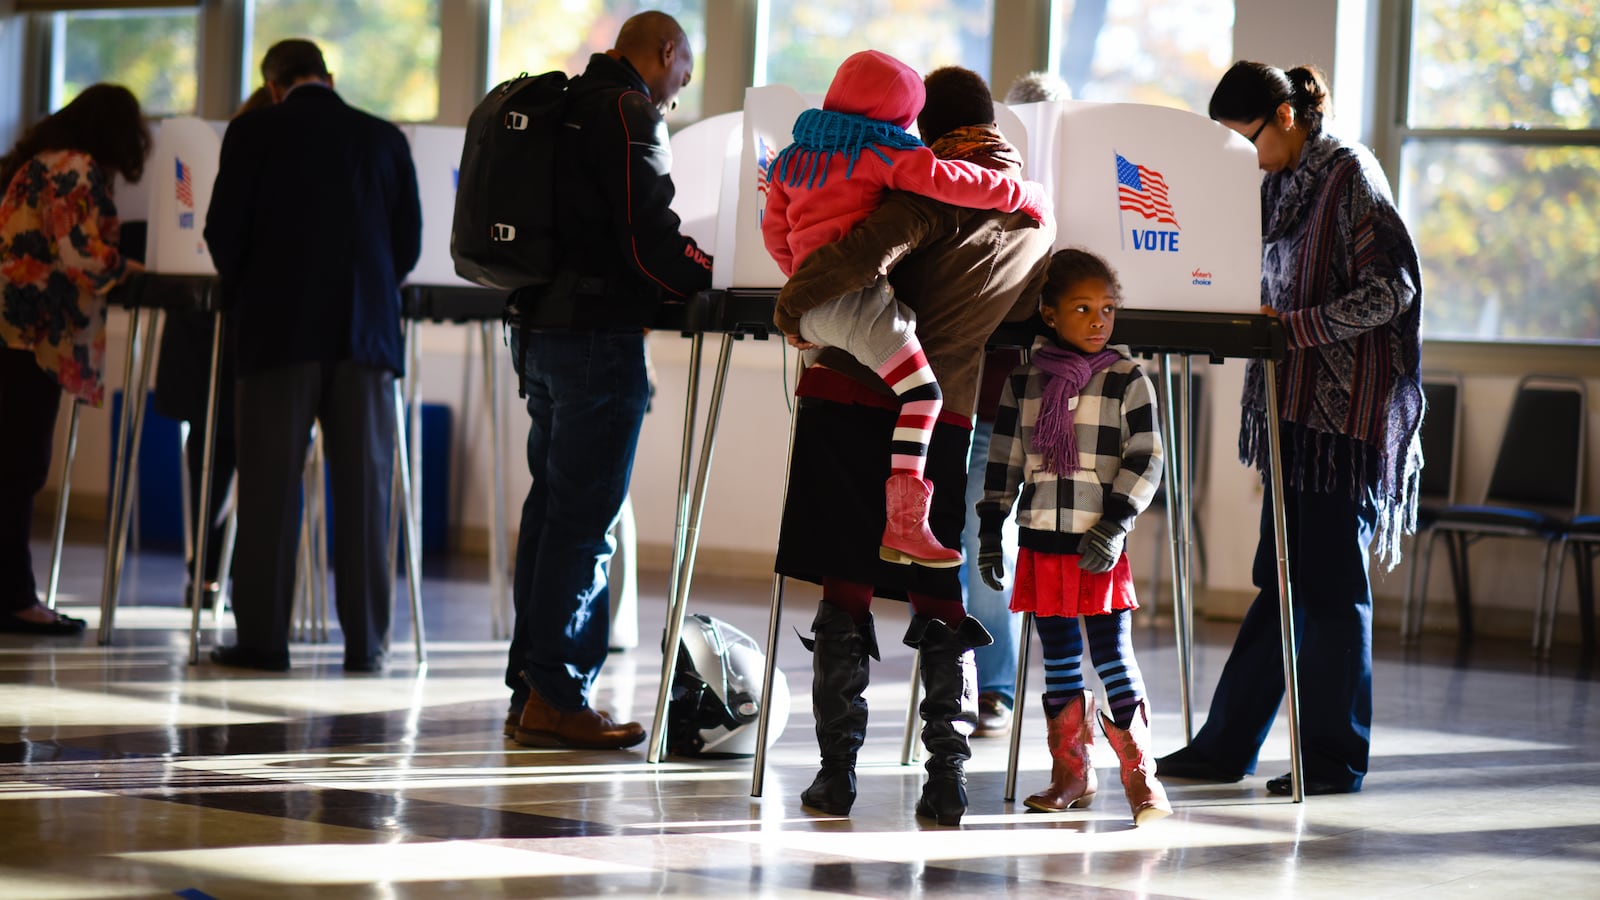 A woman holding a small child stands at a row of polling place booths, along with other voters, as a girl looks on.